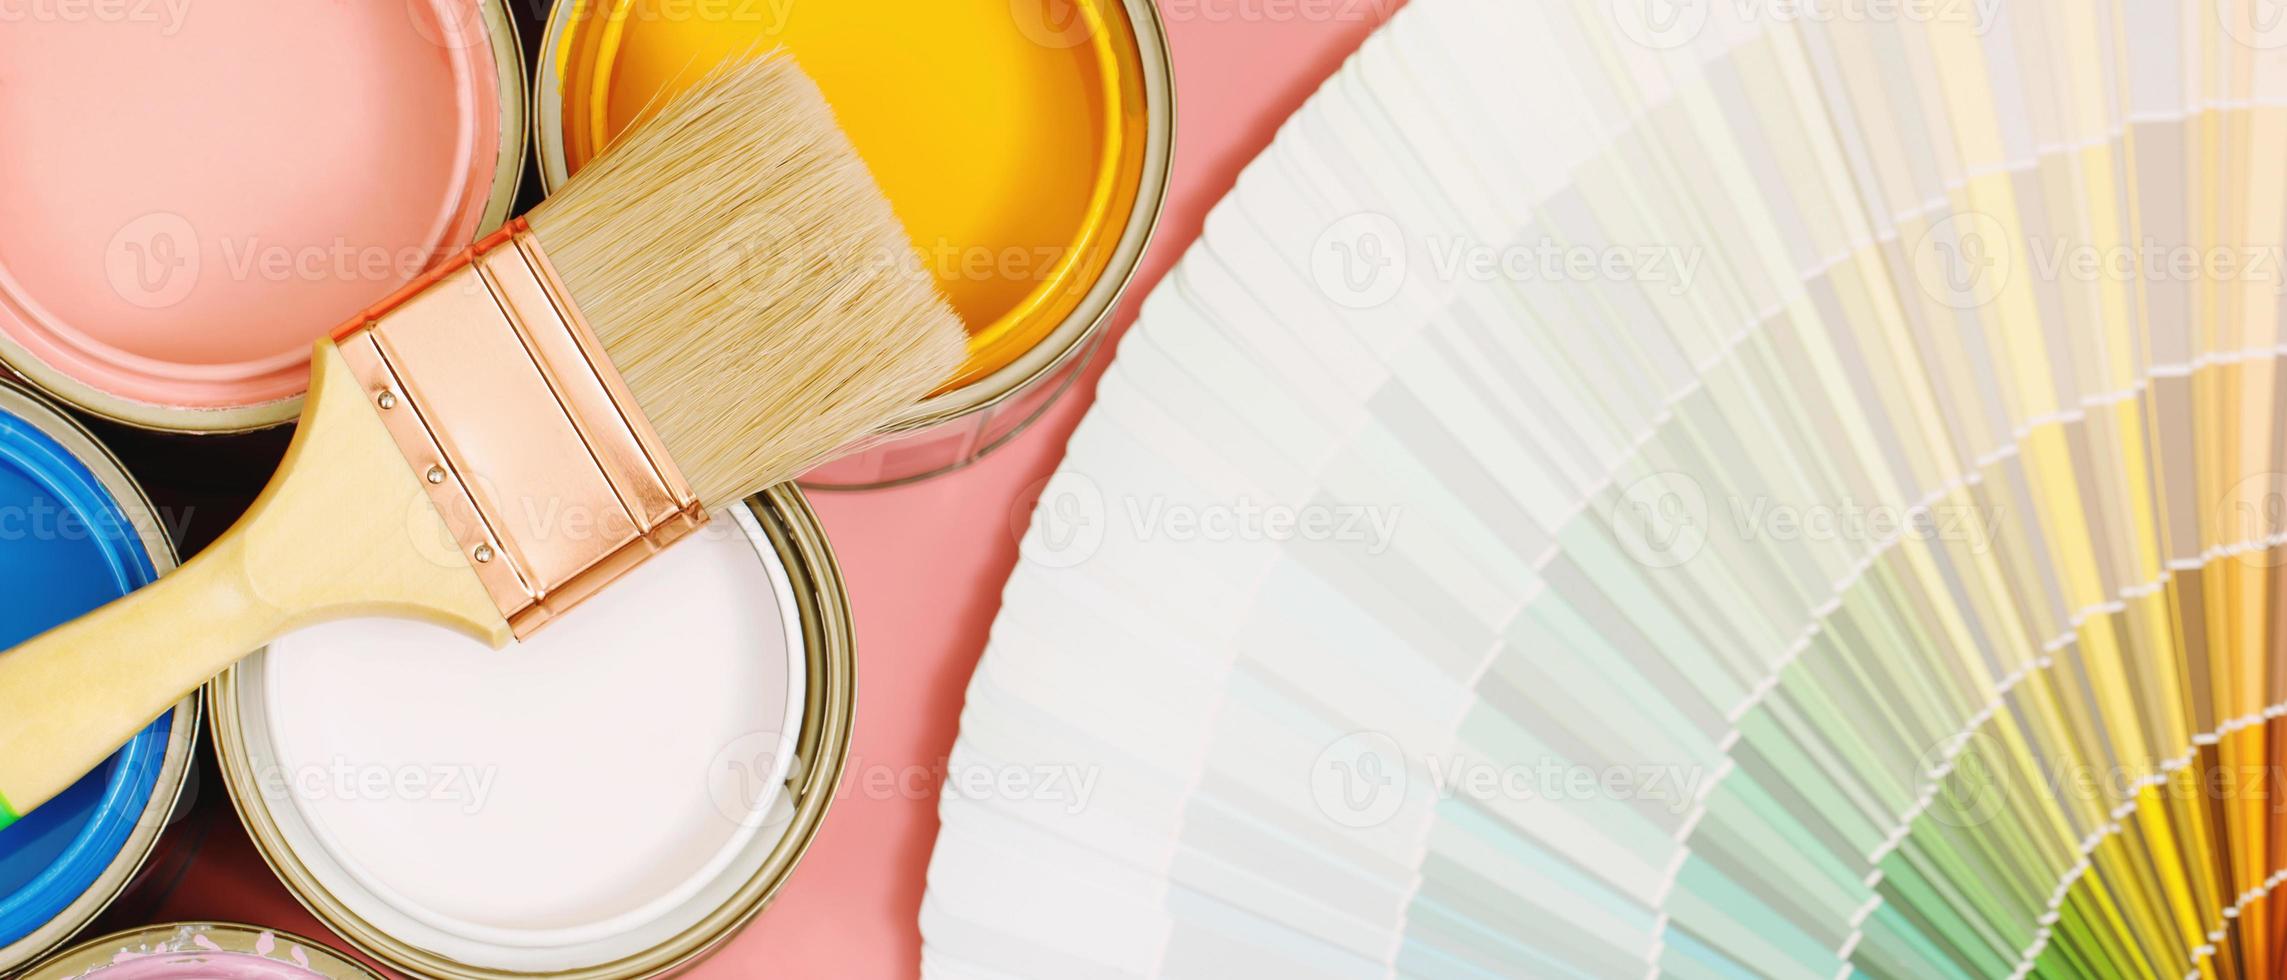 A painter is choosing a paint shade for the interior of the house's walls. with interior photo